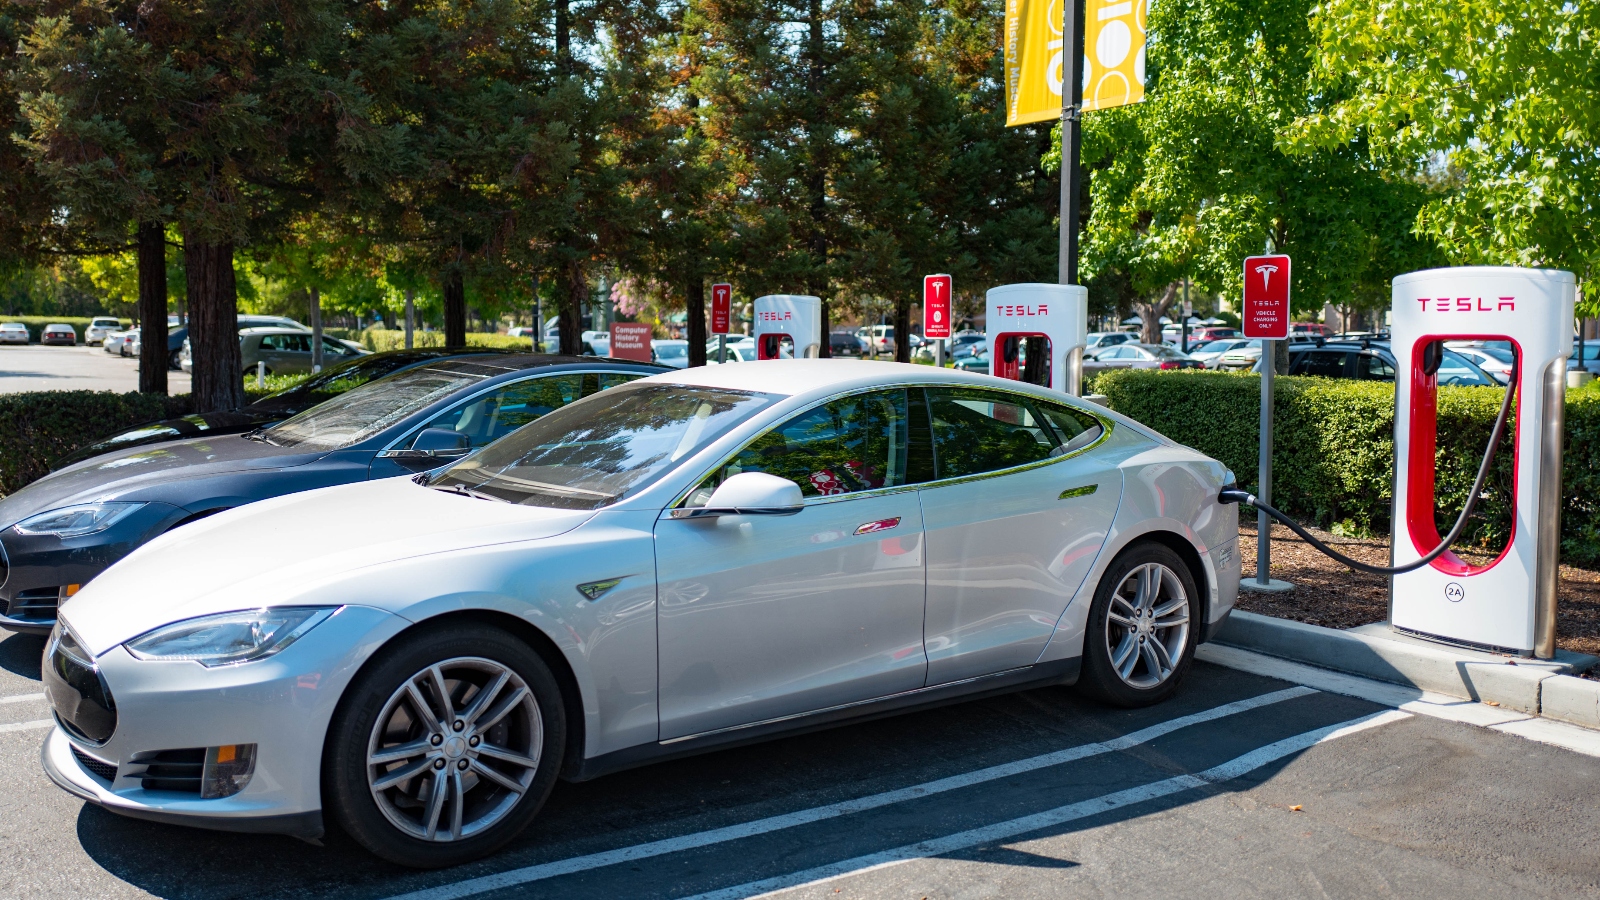 A white car sits in a parking lot attached to a Tesla charger.